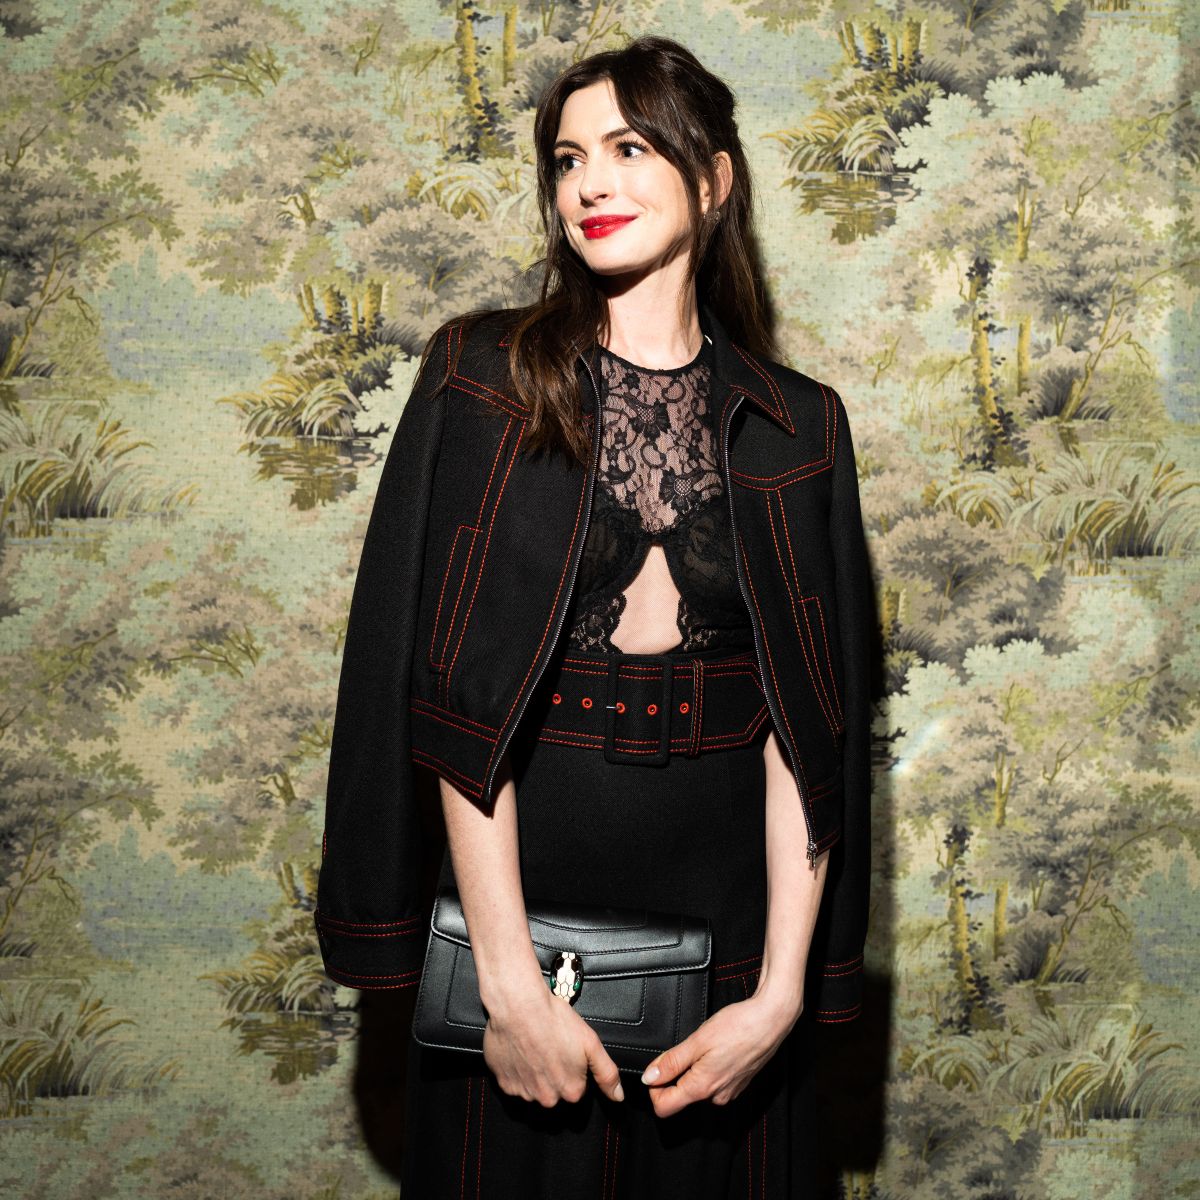 Anne Hathaway Gucci Honors Academy Awards Nominee Beverly Hills